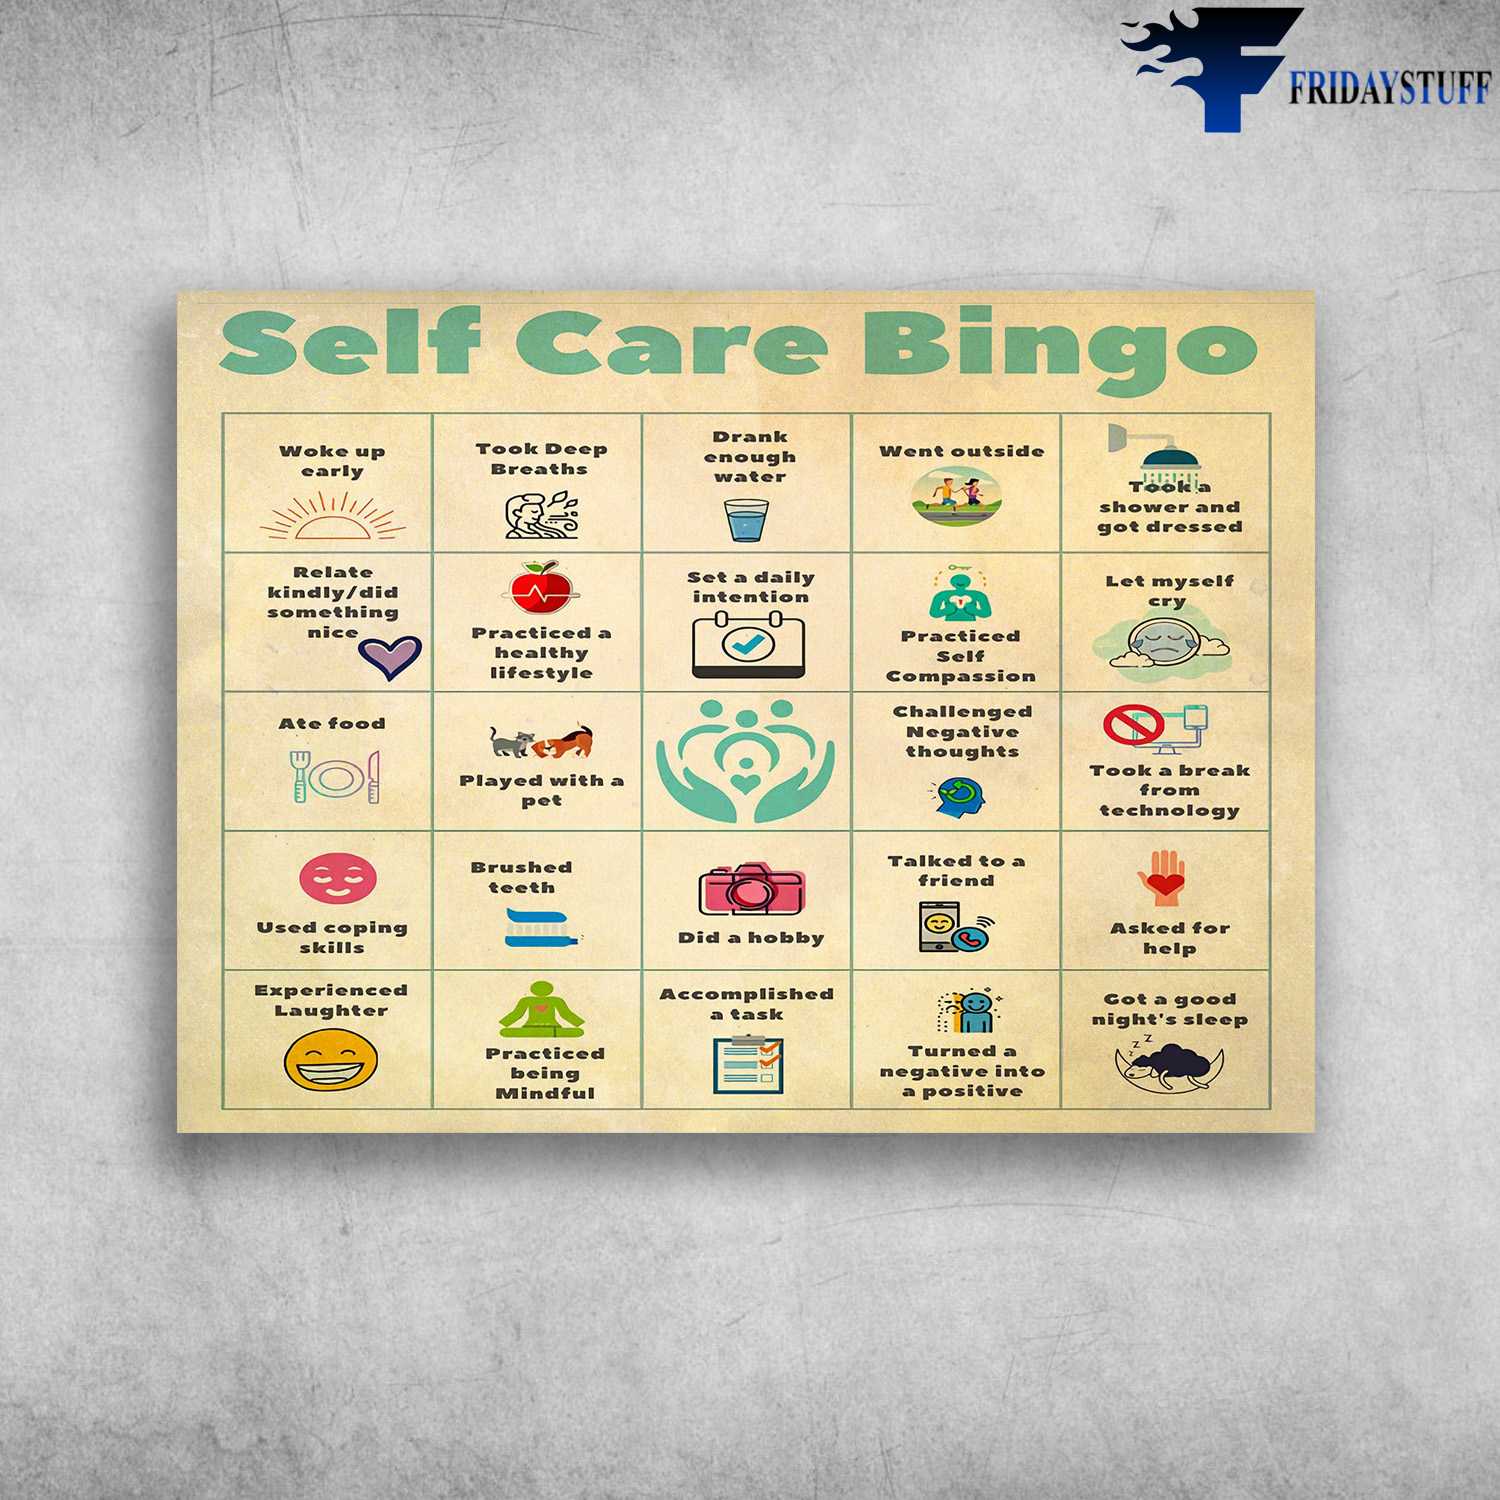 Self Care Bingo - Wake Up Early, Took Deep Breaths, Drink Enough Water, Went Outside, Took A Shower And Got Dressed, Relate Kindly, Did Something Nice, Practiced A healthy Lifestyle